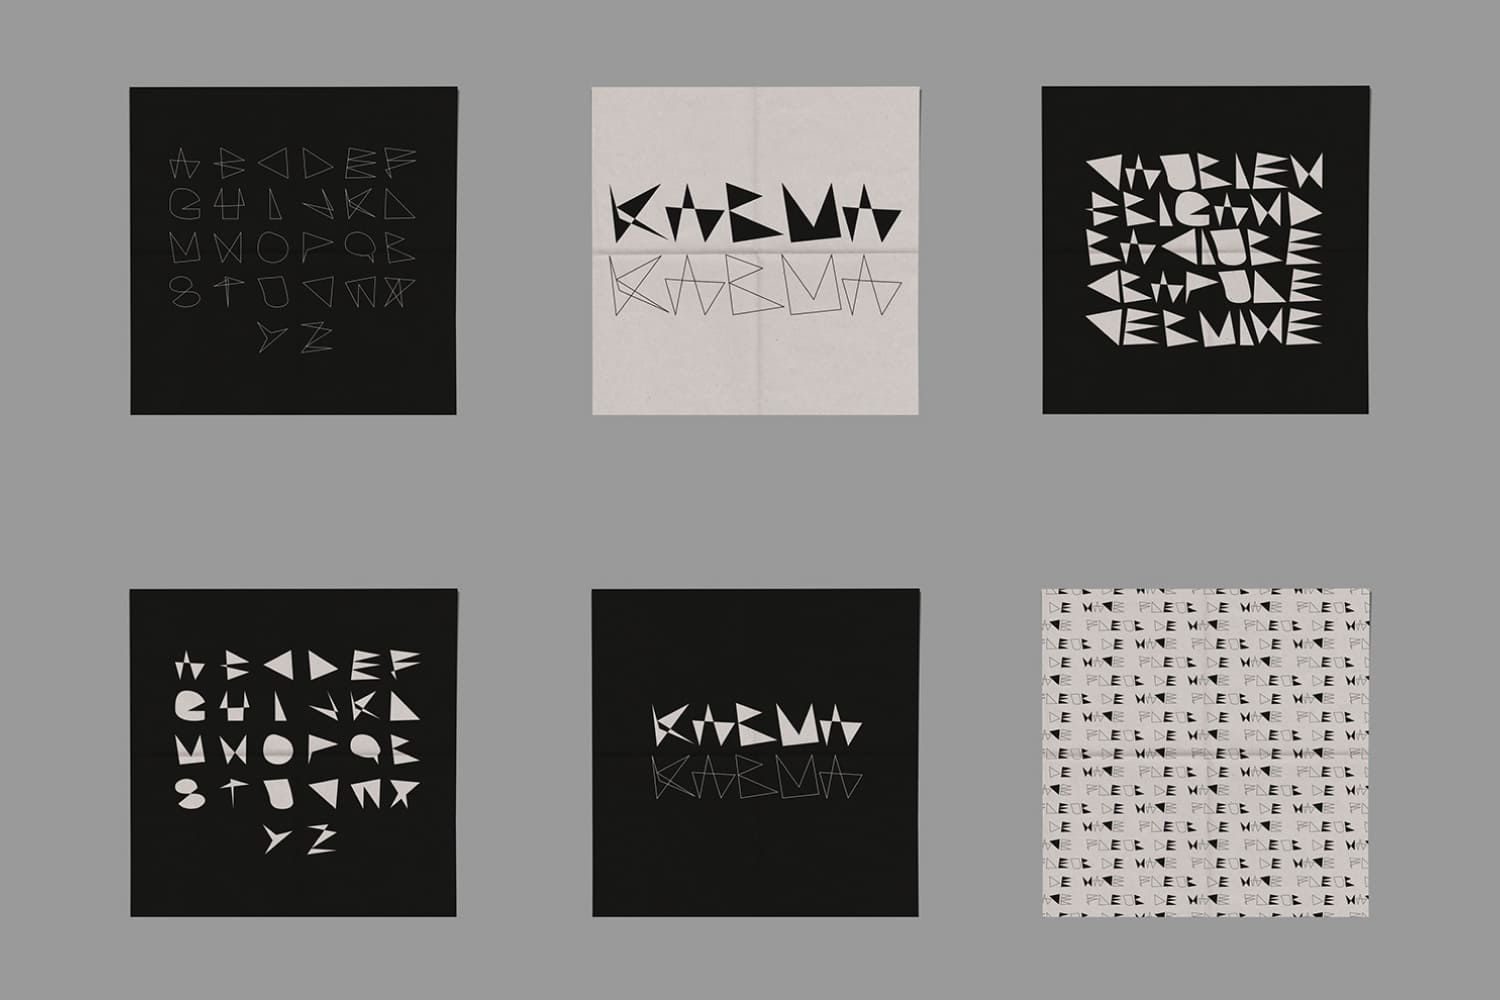 Collage of black and beige squares with text in unusual letters.